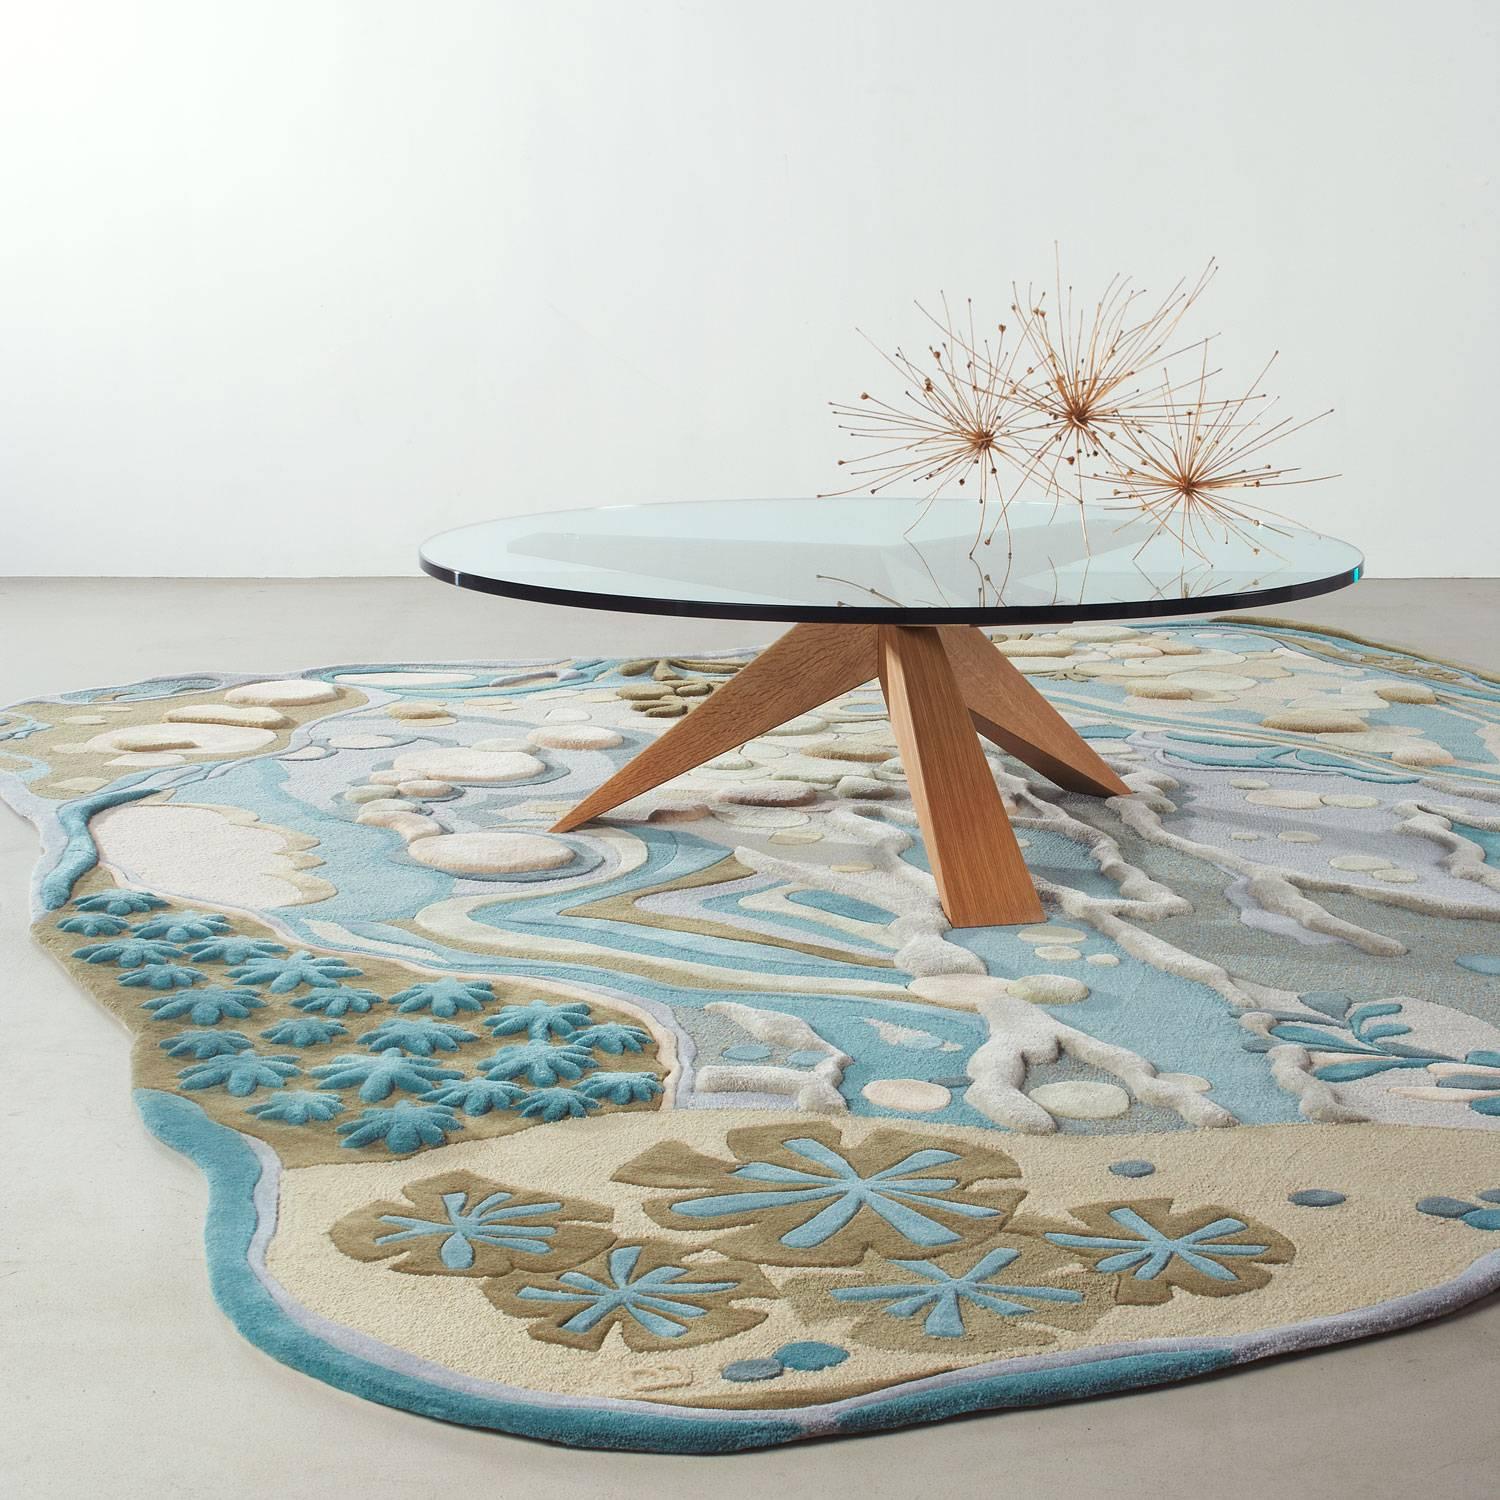 The Angela Adams Dune area rug is an organic, free-form, coastal design inspired by the abundant beauty of nature found along the ocean's edge. Sand dollars, beach rocks, mussel shells, starfish and seaweed inhabit the sand, saltwater and surf.